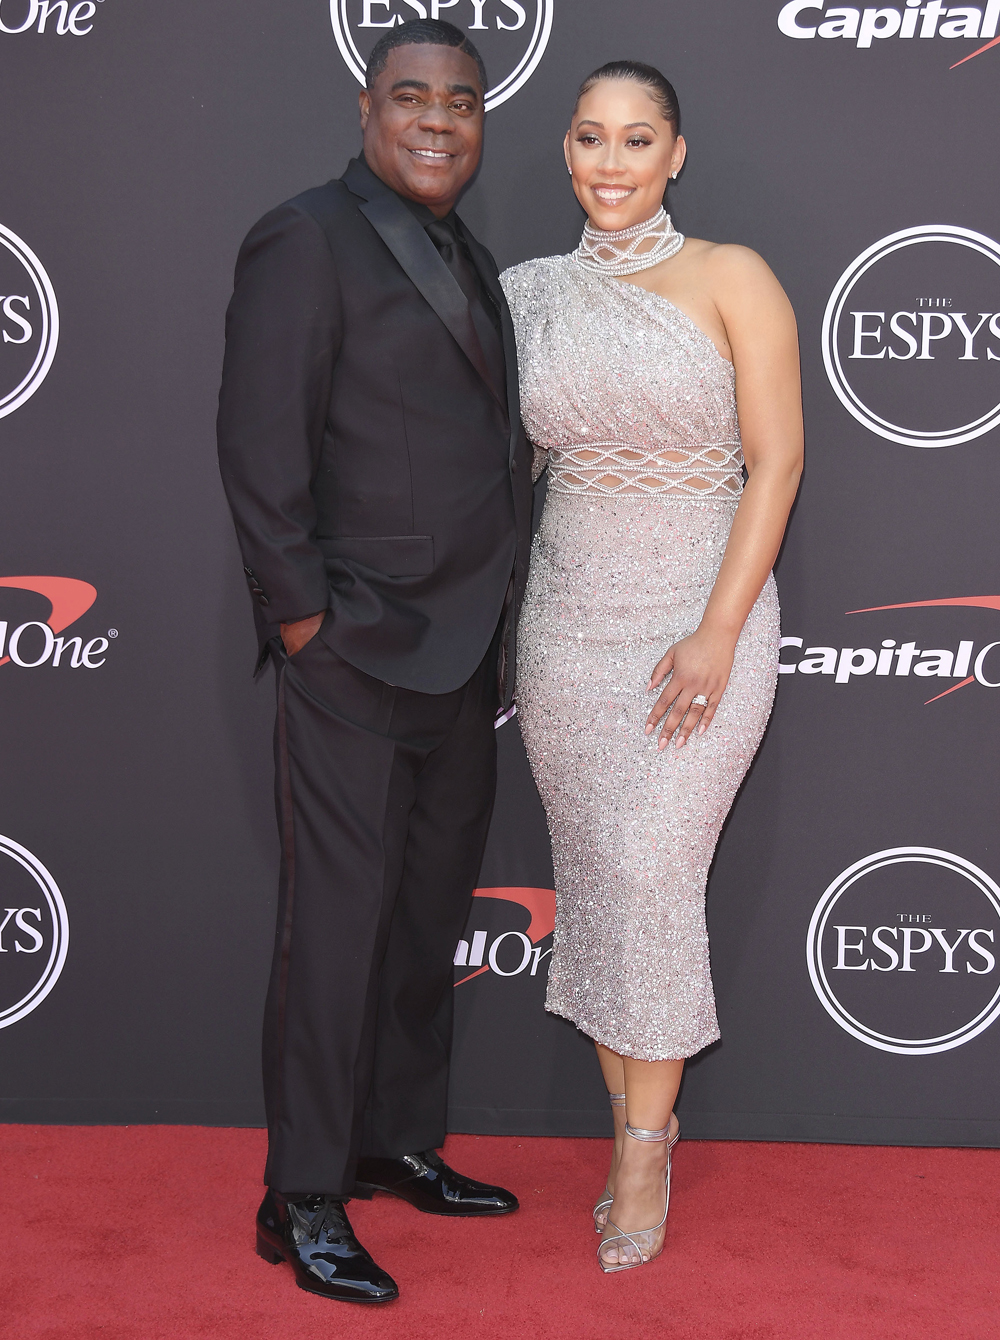 (L-R) Tracy Morgan and Megan Wollover arrives at The 2019 ESPYs held at the Microsoft Theater in Los Angeles, CA on Wednesday, July 10, 2019. (Photo By Sthanlee B. Mirador/Sipa USA)(Sipa via AP Images)